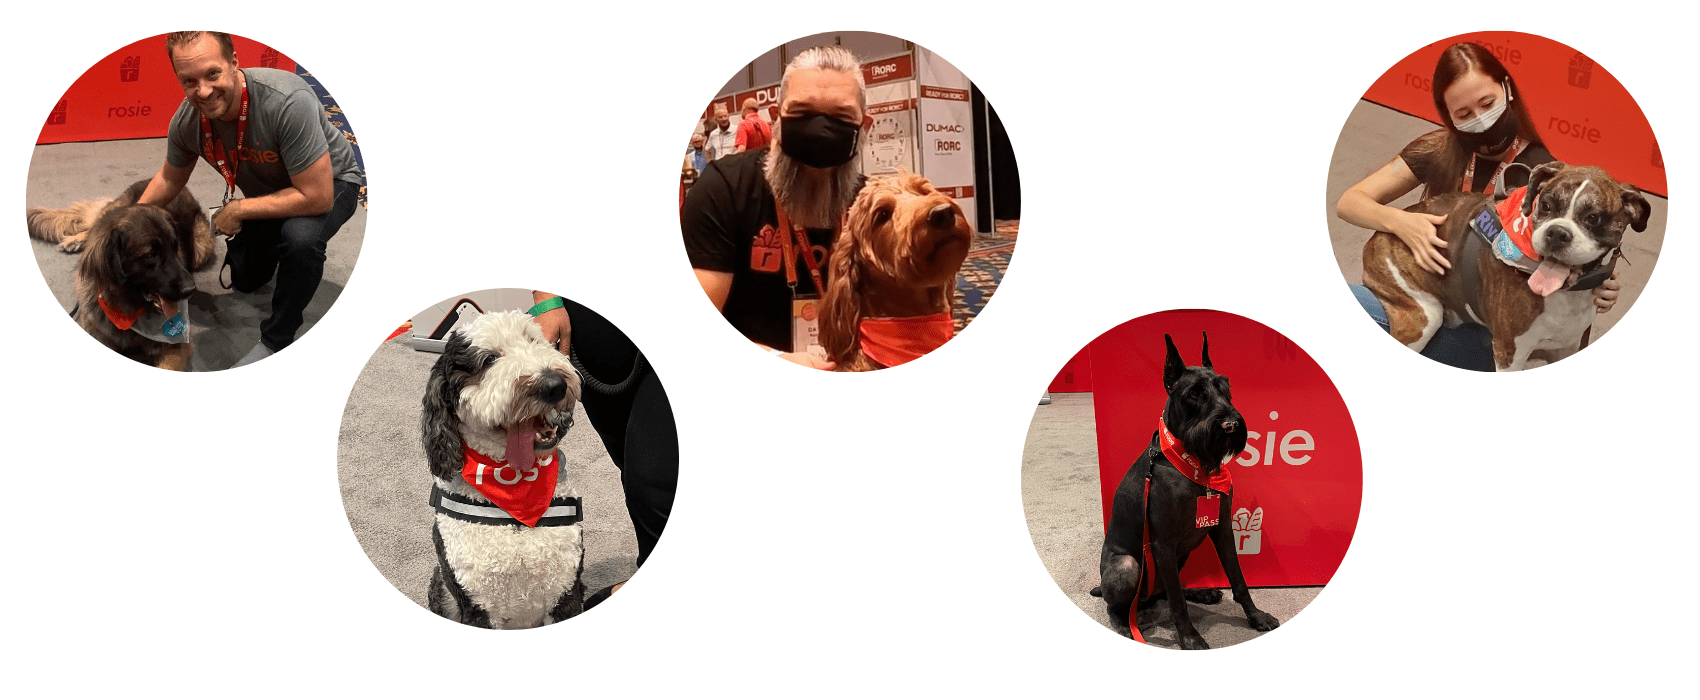 Pictures of five dogs in a Rosie bandana at the booth, some pictured with Rosie team members